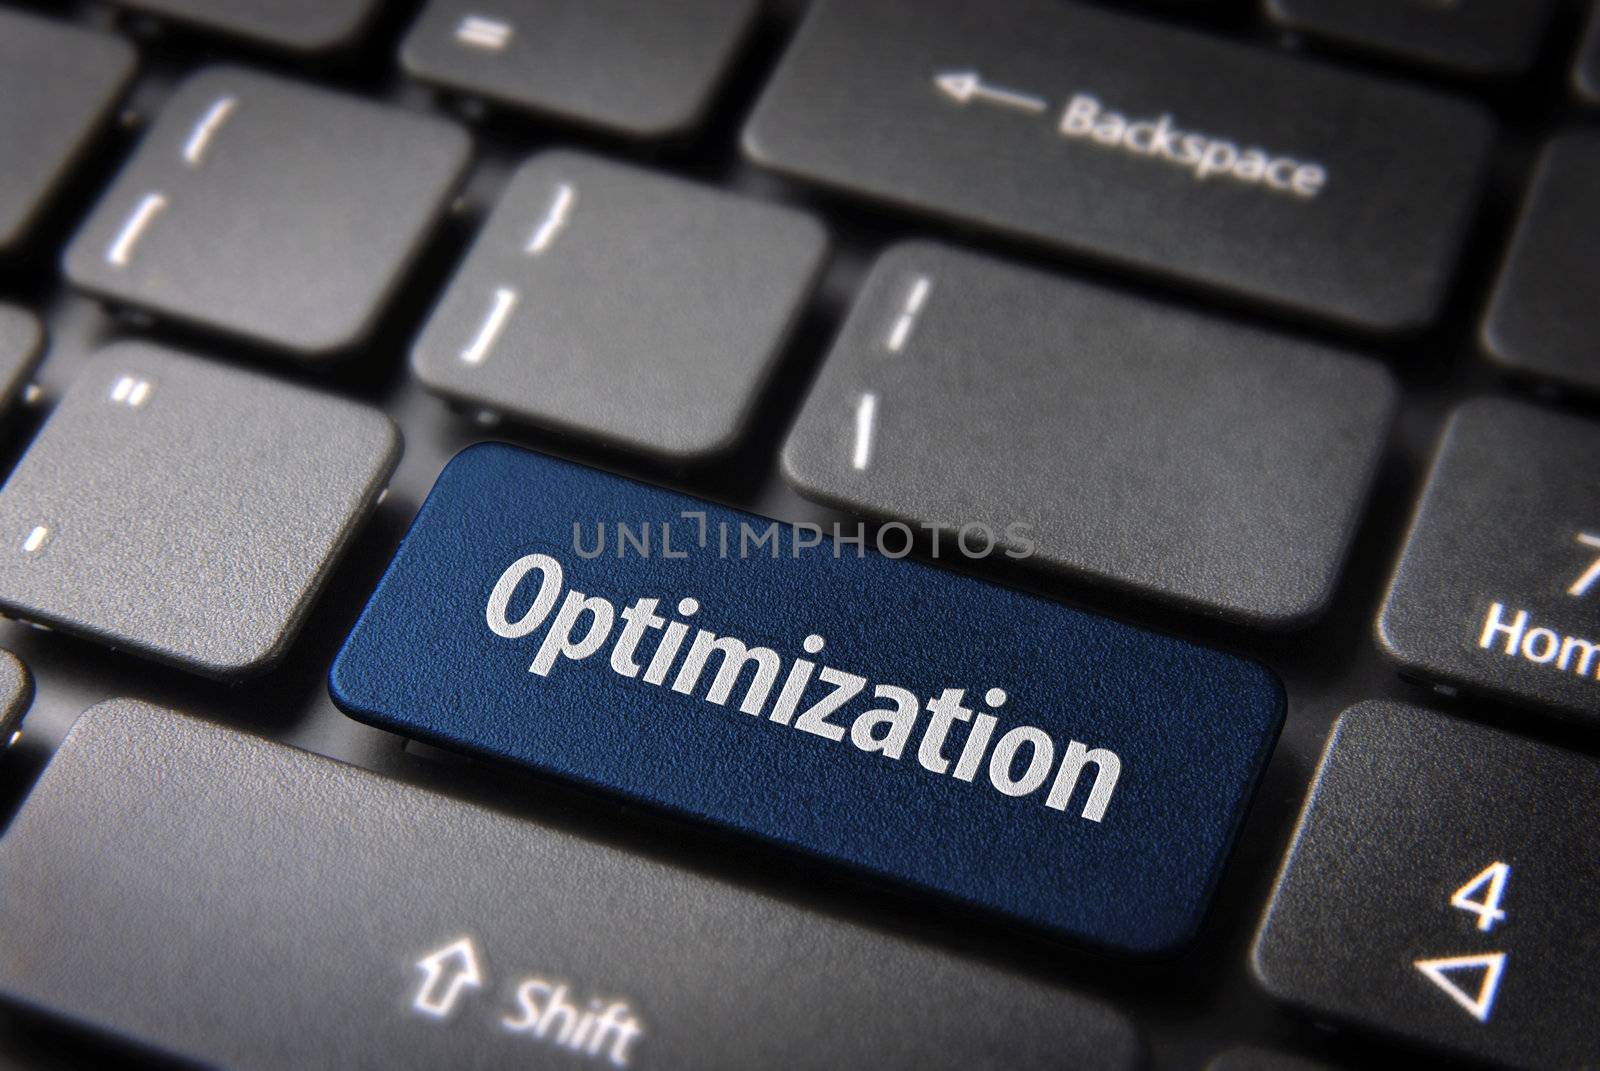 Blue key with Optimization word on laptop keyboard. Included clipping path, so you can easily edit it.